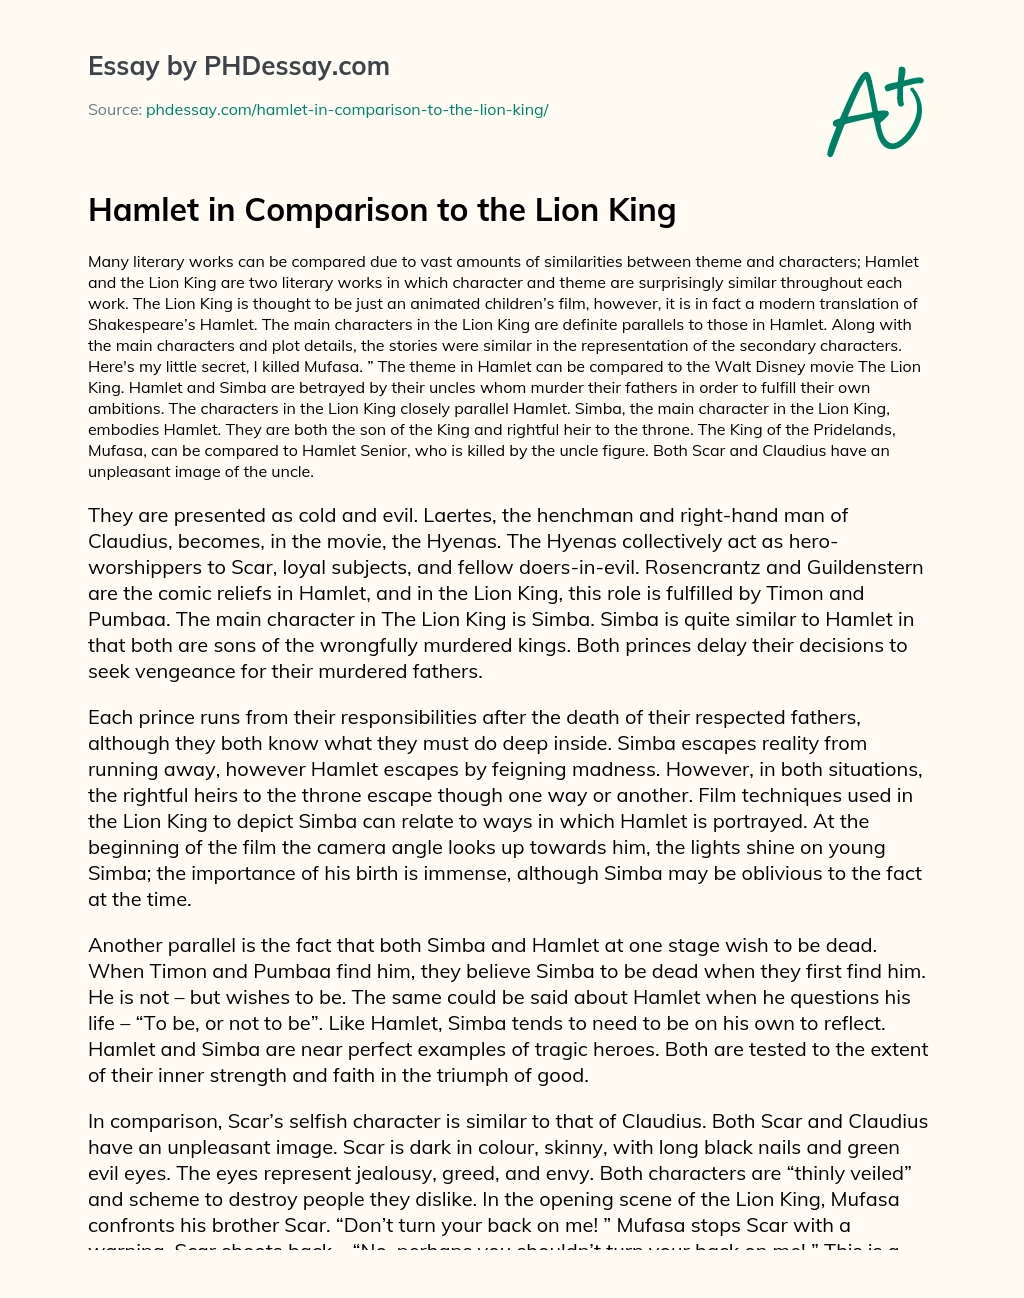 Hamlet in Comparison to the Lion King essay